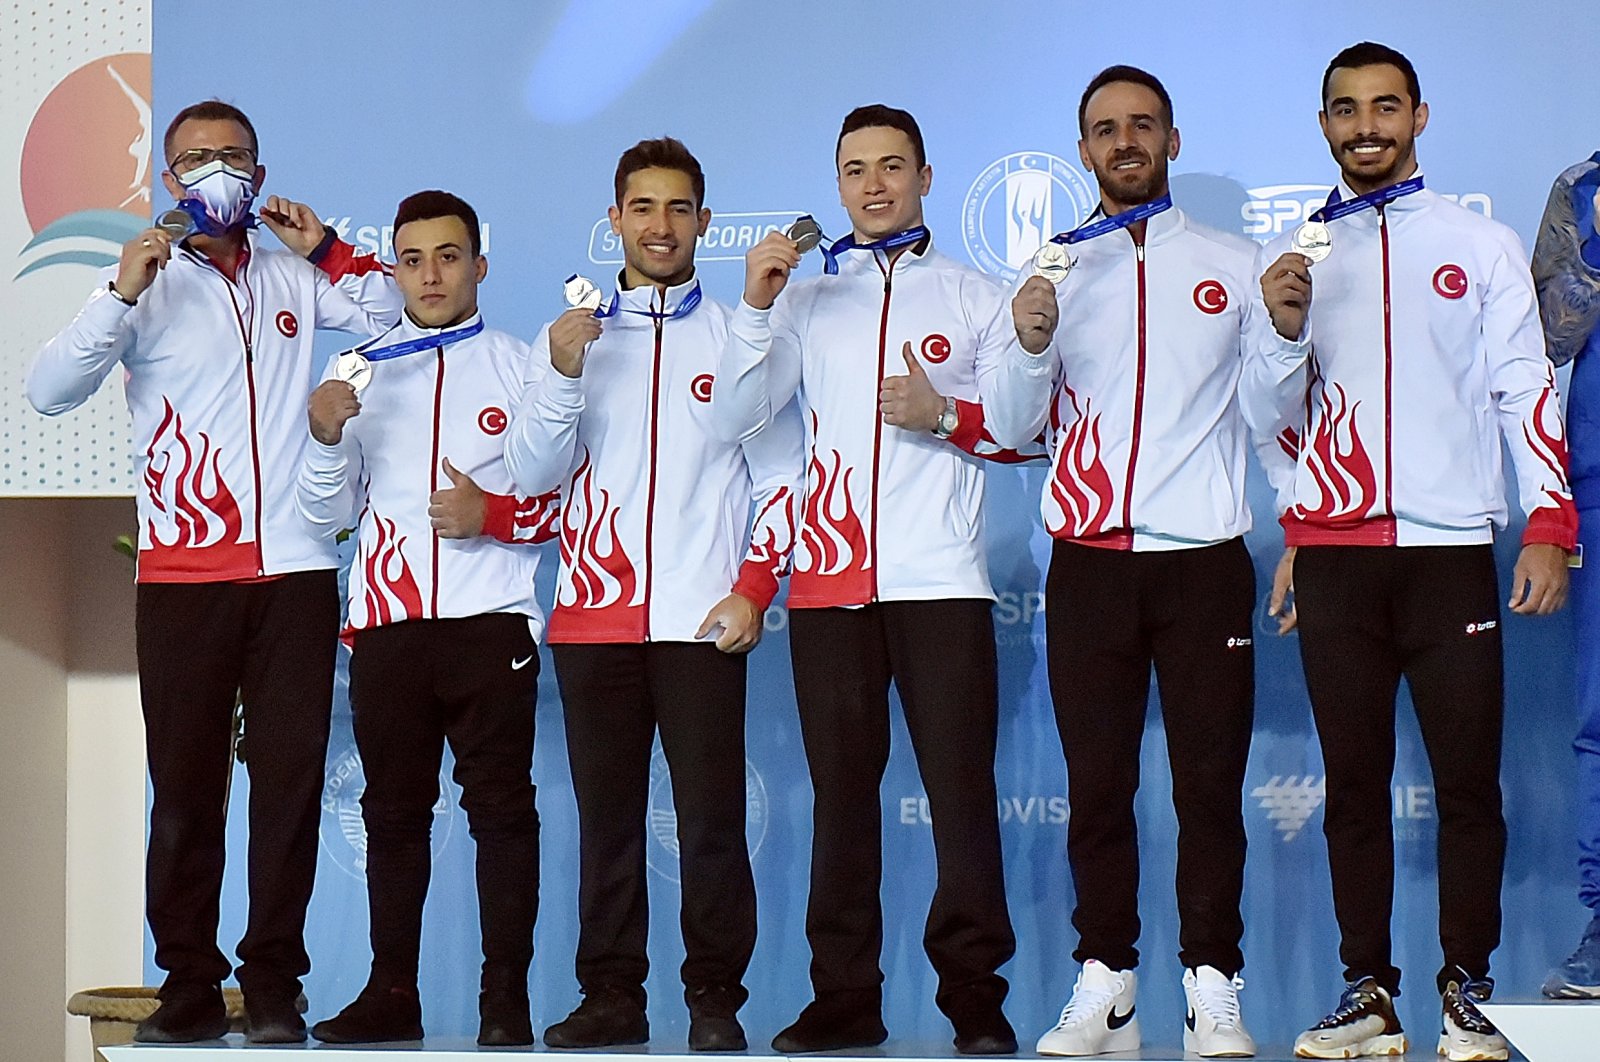 Turkish athletes pose with their medals at the European Championships in Men's Artistic Gymnastics in Mersin, Turkey, Dec. 12, 2020. (AA Photo)